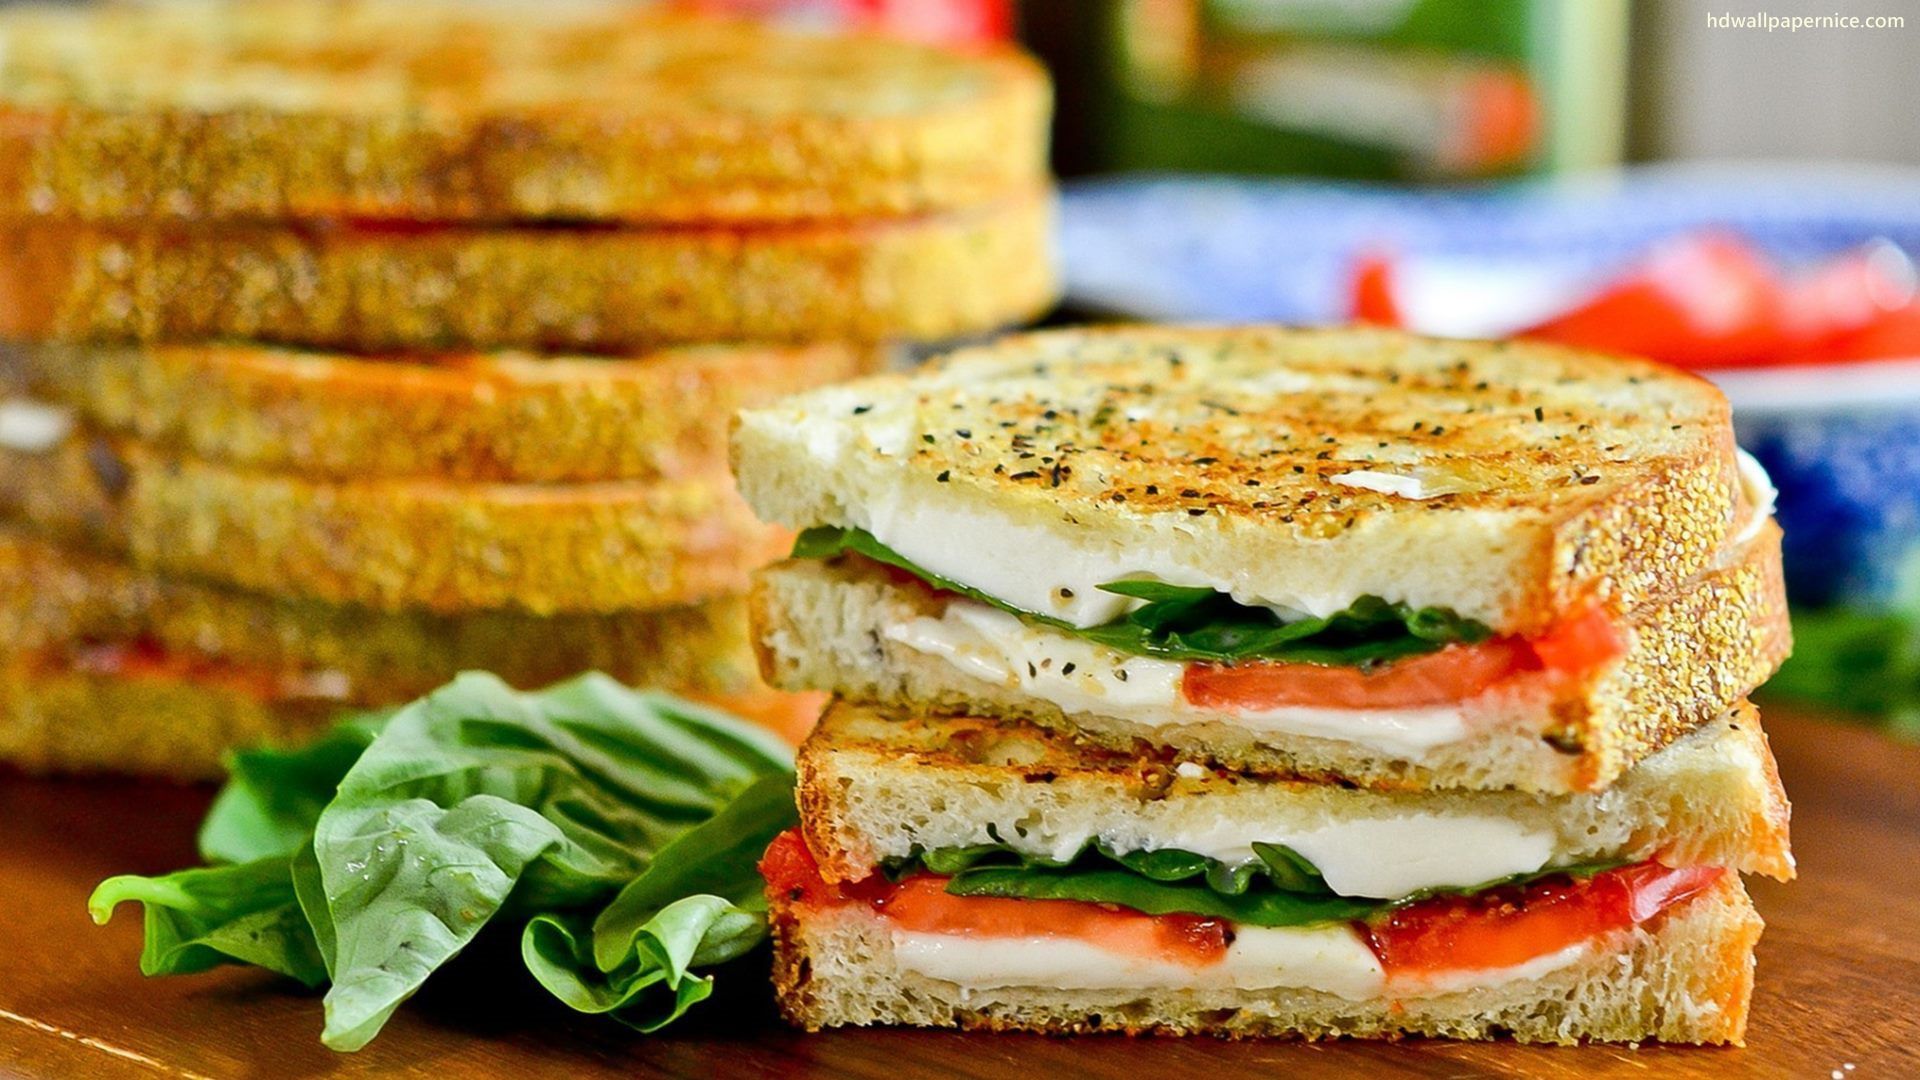 Grilled Cheese And Tomato Sandwich HD .wallpaperpick.com